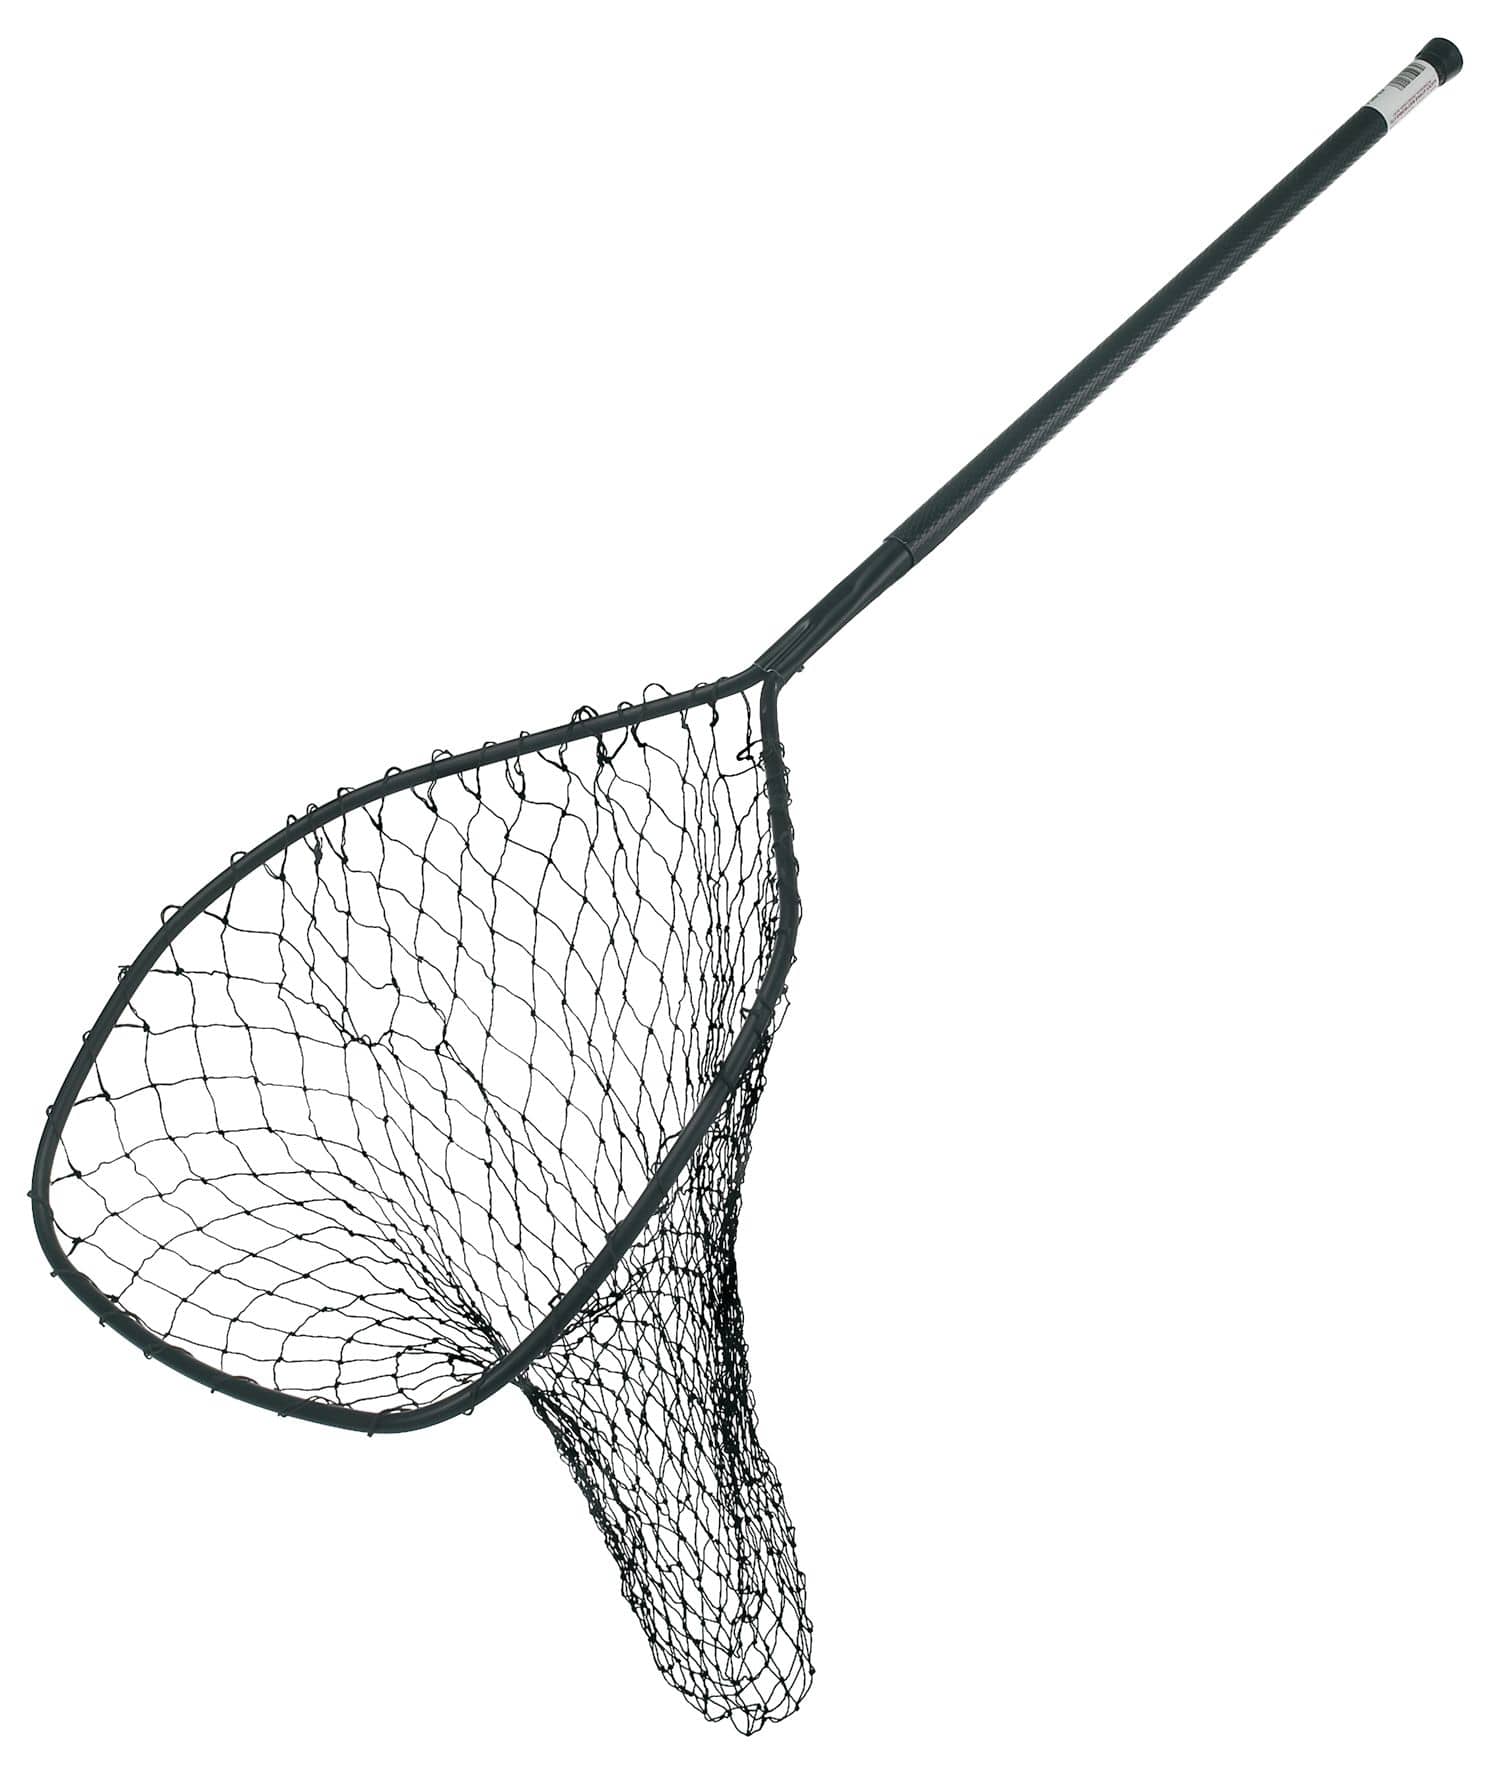 https://media-www.canadiantire.ca/product/playing/fishing/fishing-accessories/0784041/lucky-strike-deluxe-fishing-net-with-telescopic-handle-df846ae5-7344-482f-a83a-04968e2ac477-jpgrendition.jpg